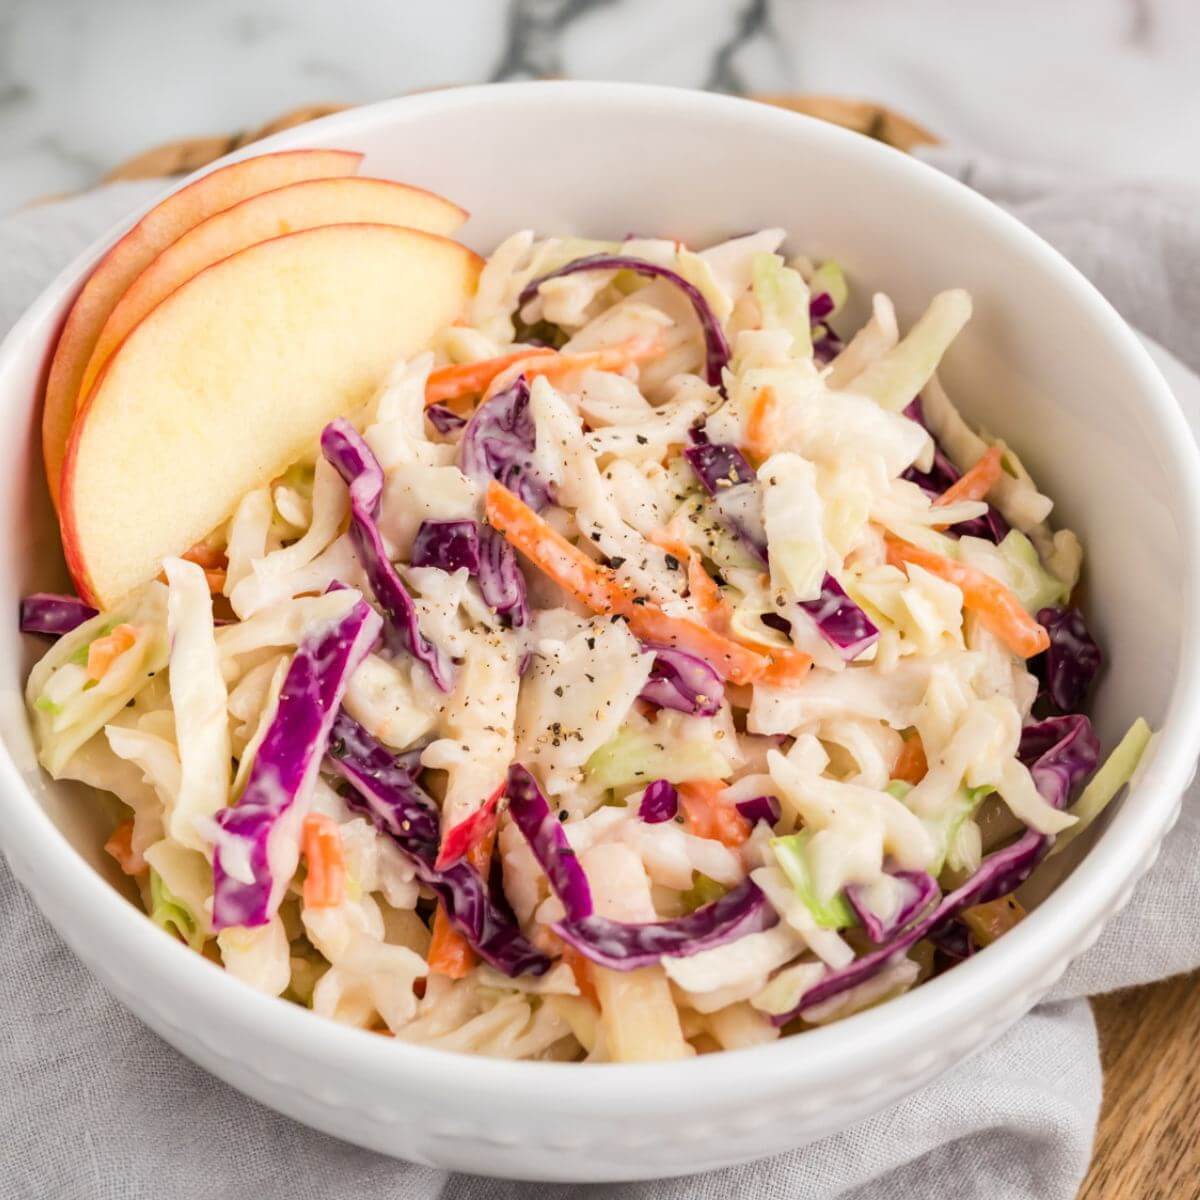 A full bowl of coleslaw includes neat apple slices on side.